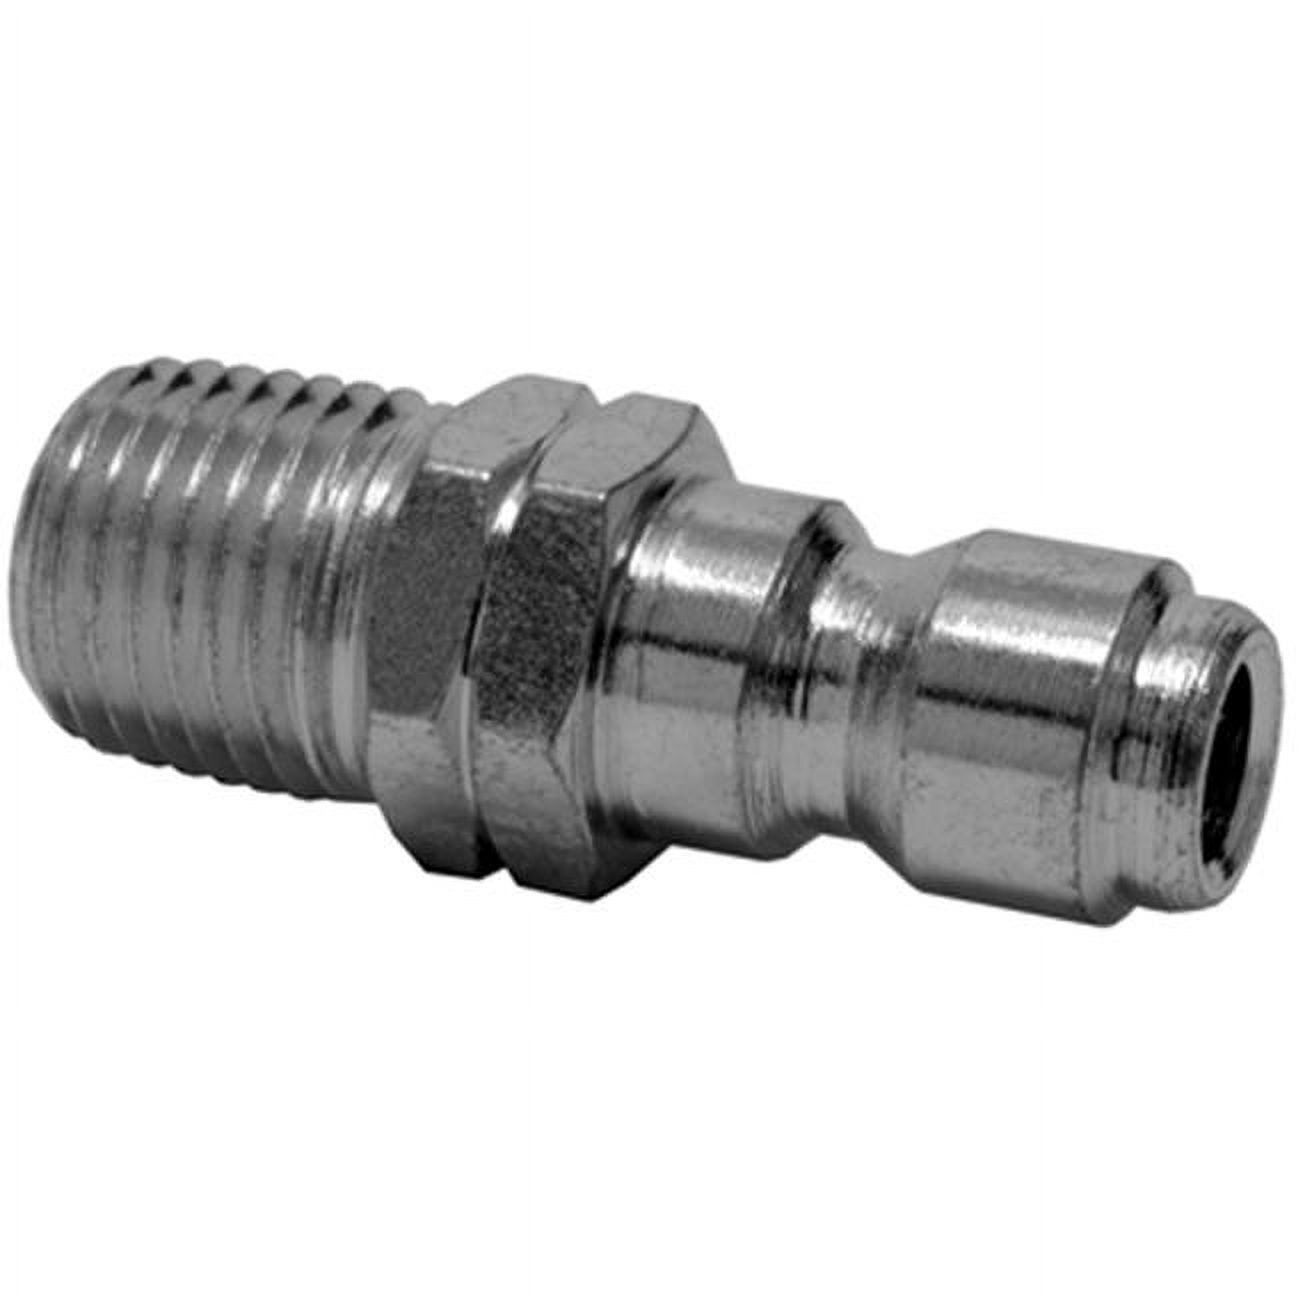 29022 0.25 In. Male Quick Connect Plug